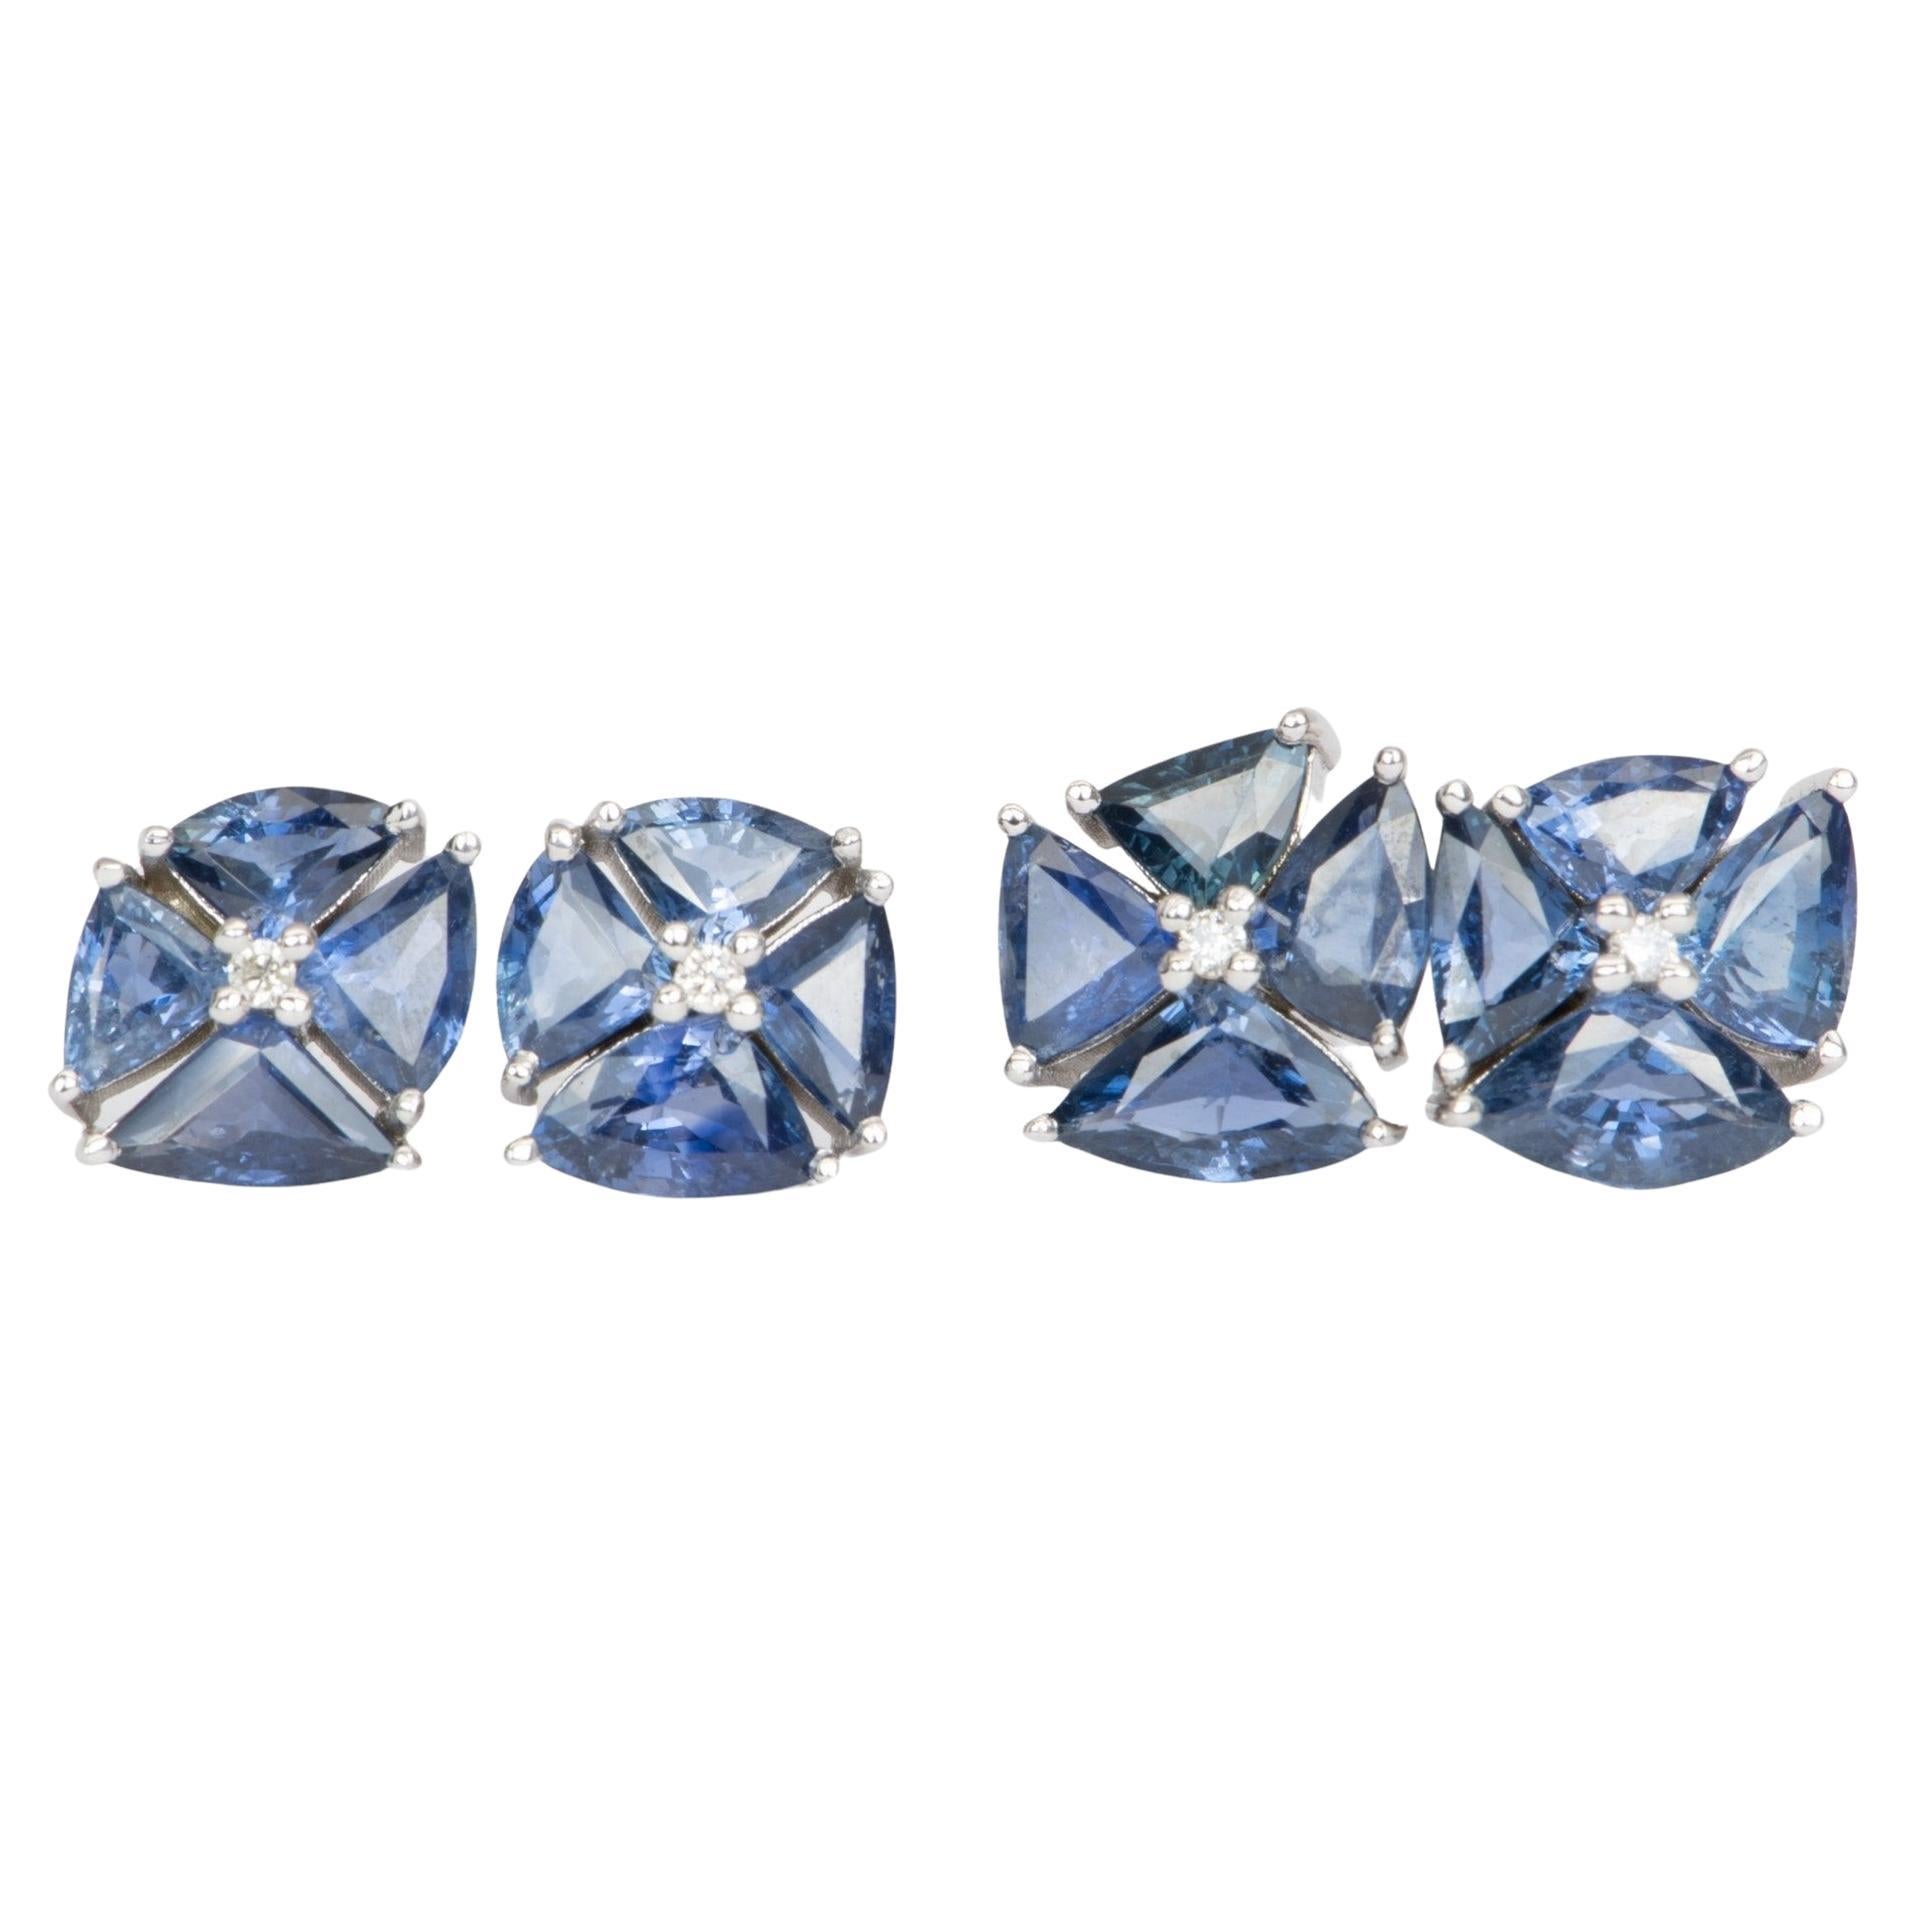 Stunning Royal Blue Sapphire and Diamond Cluster Earrings 14k White Gold R3080 For Sale